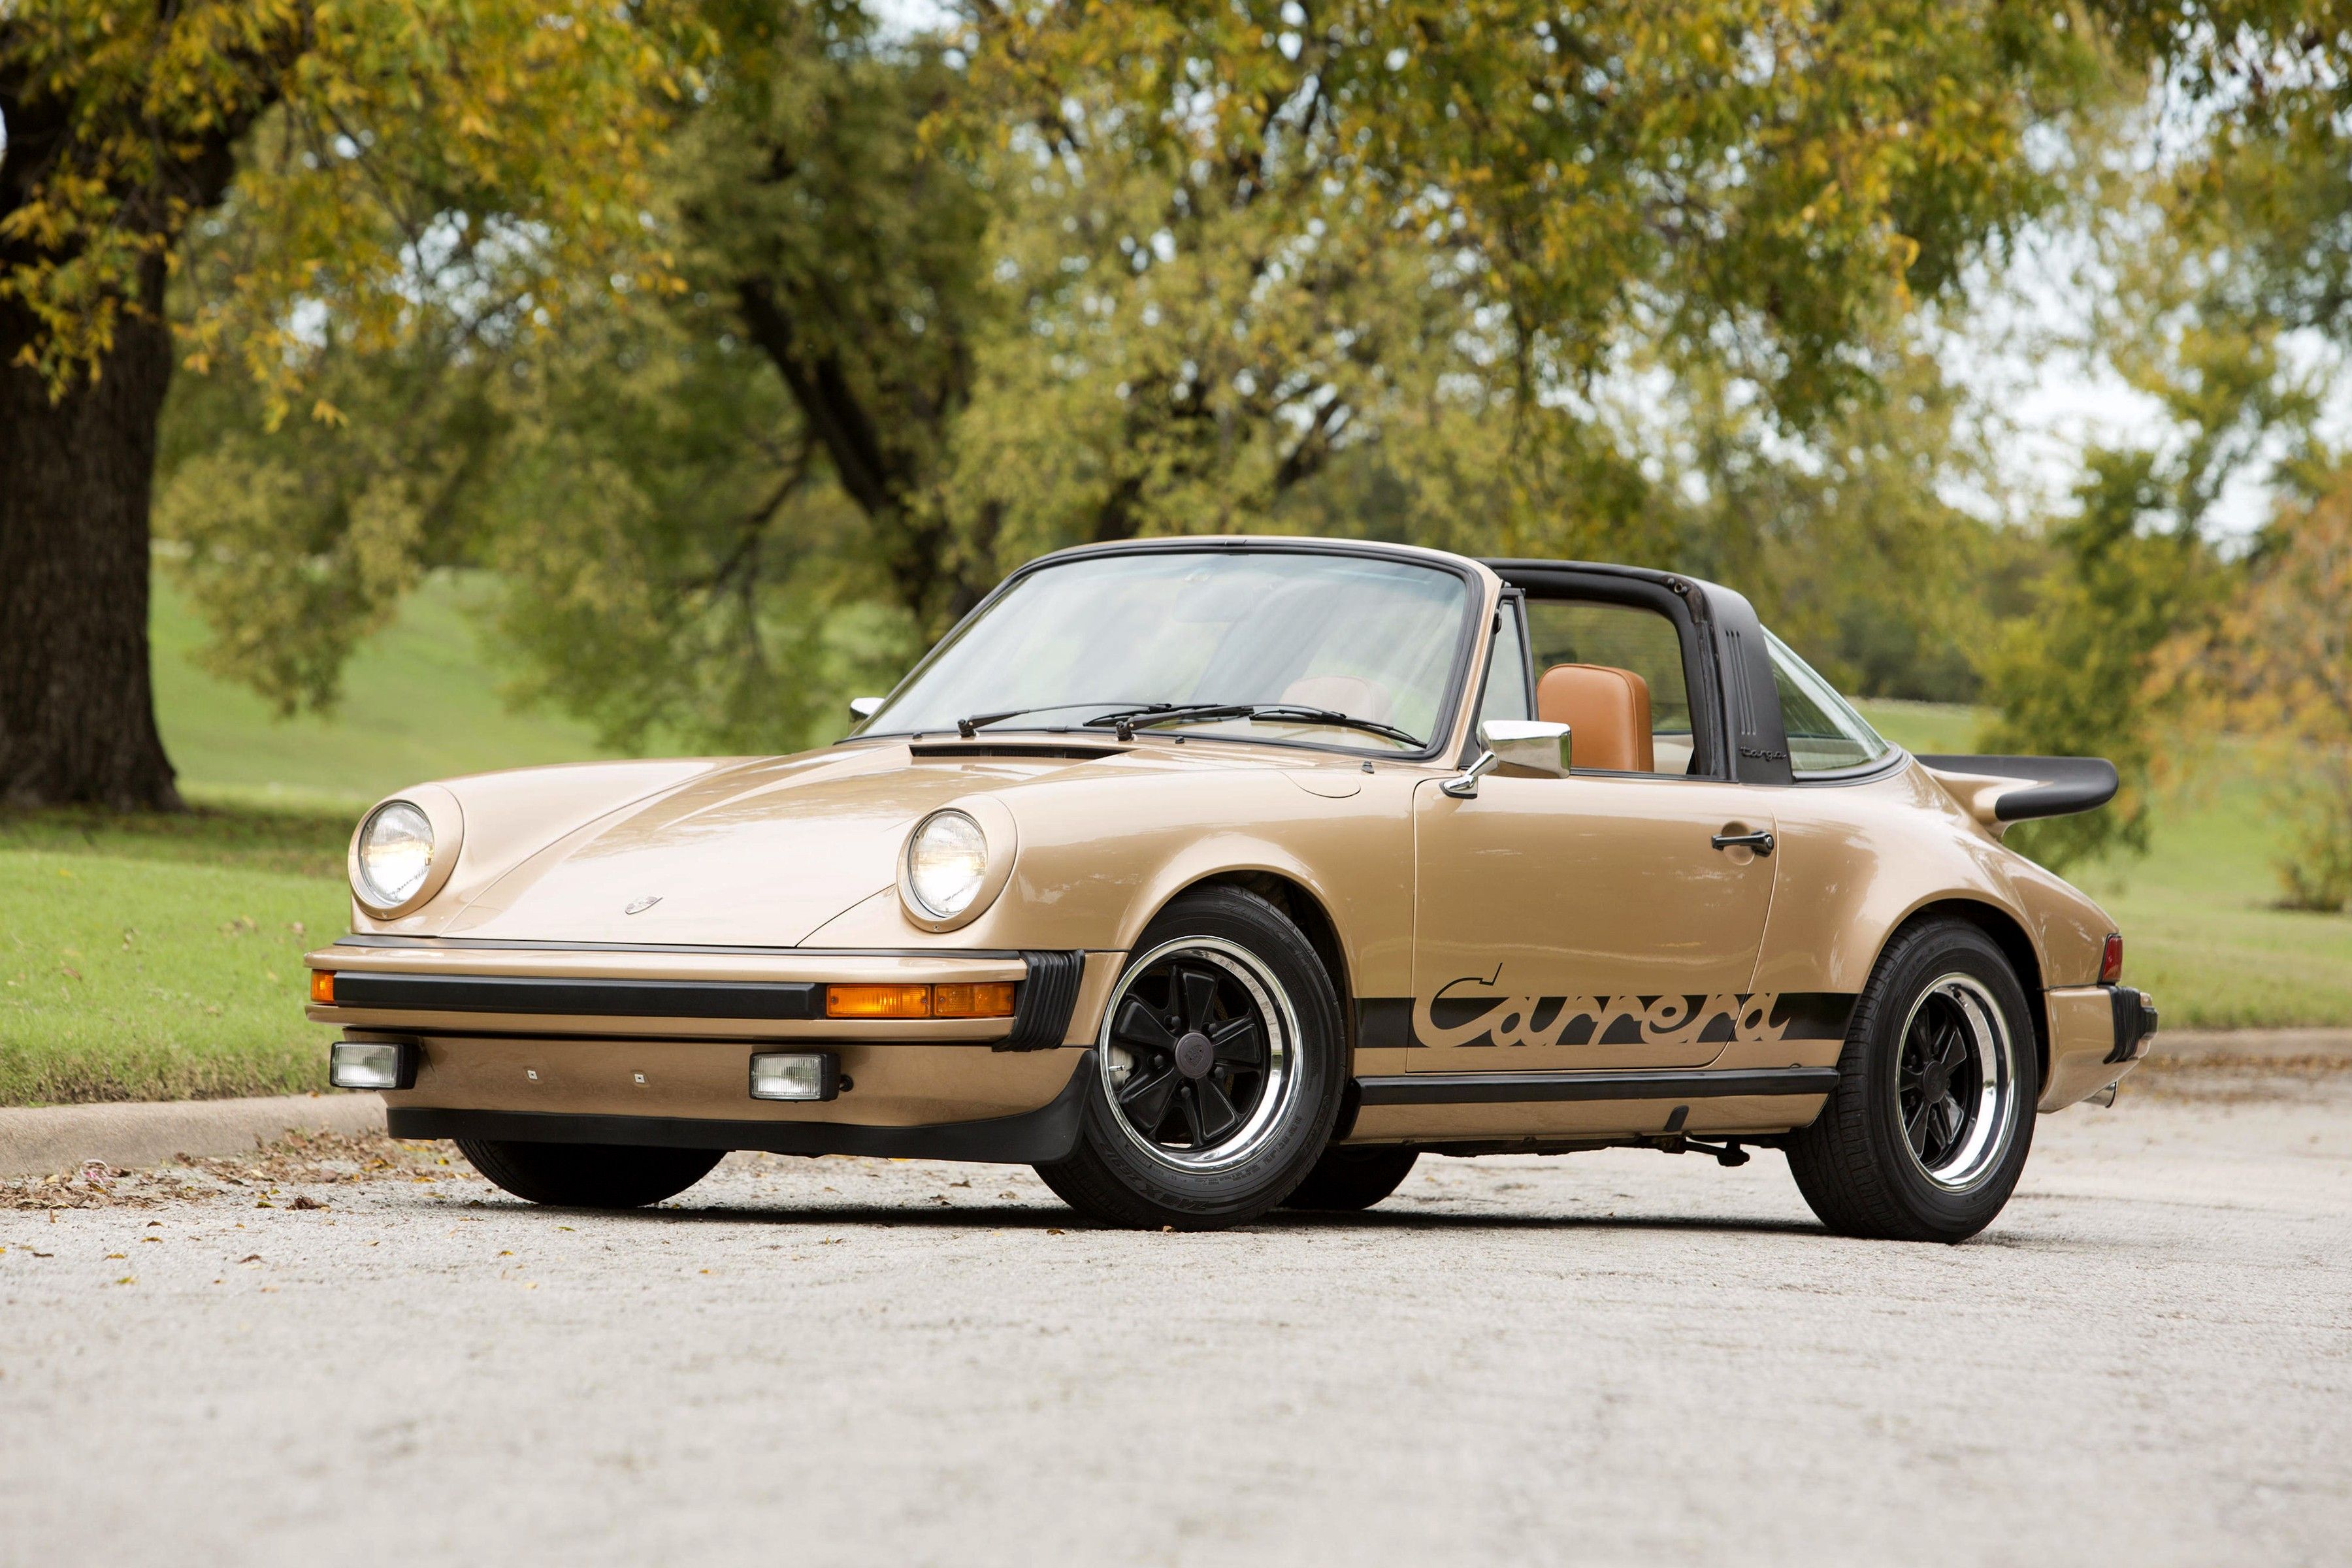 Porsche 930: The iconic sports car built for all ages.